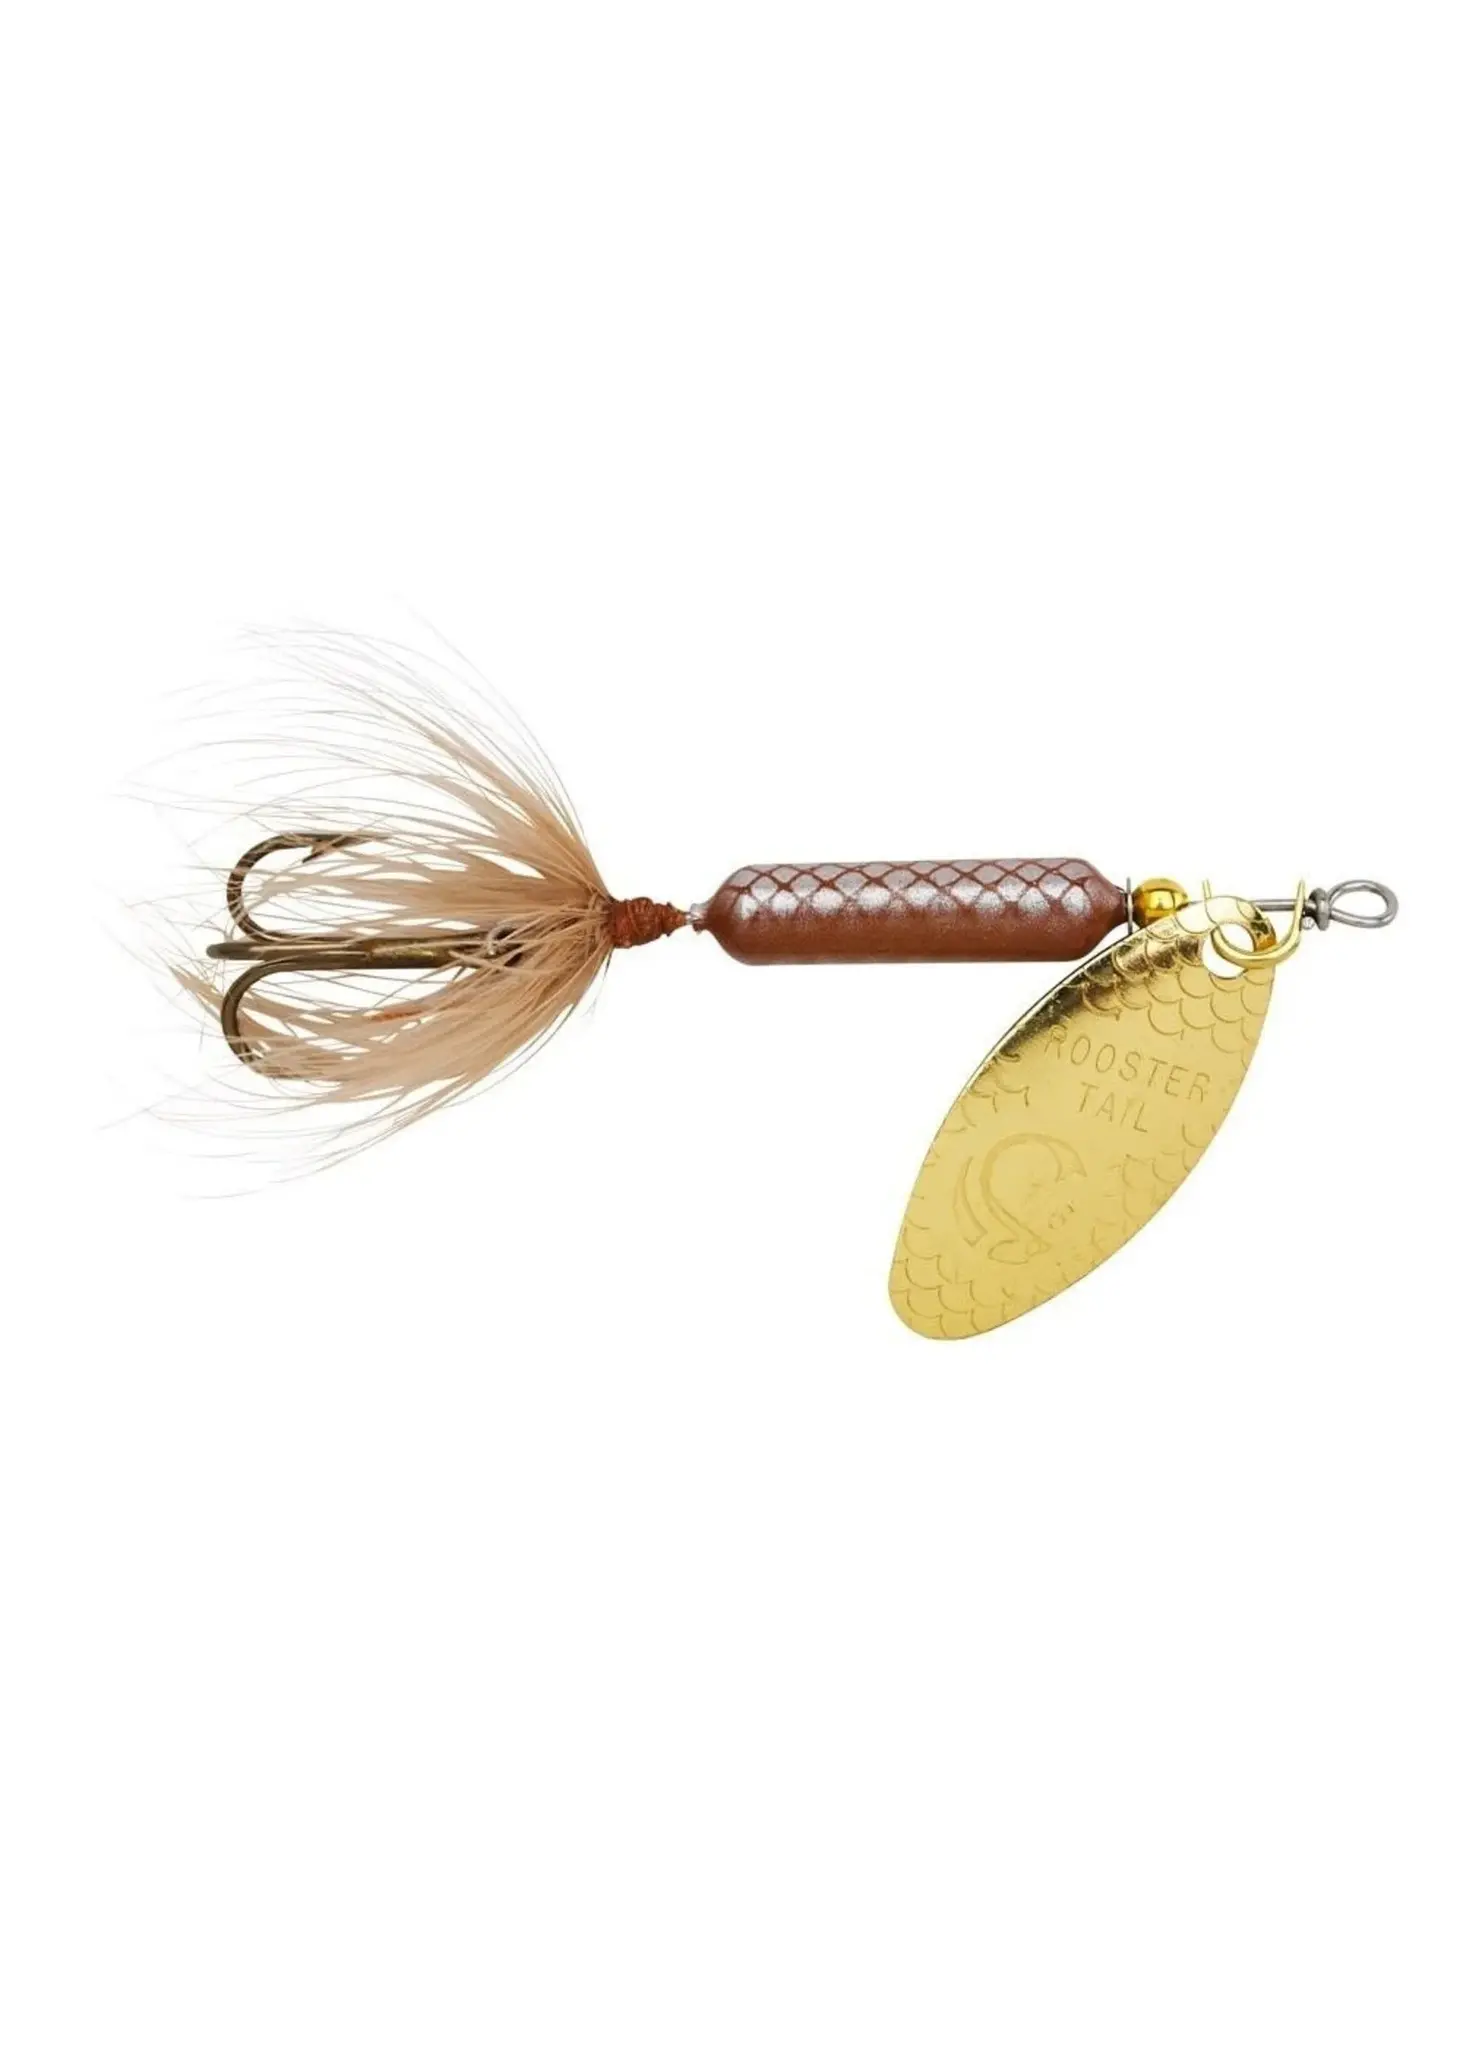 Best Trout Lures 2023